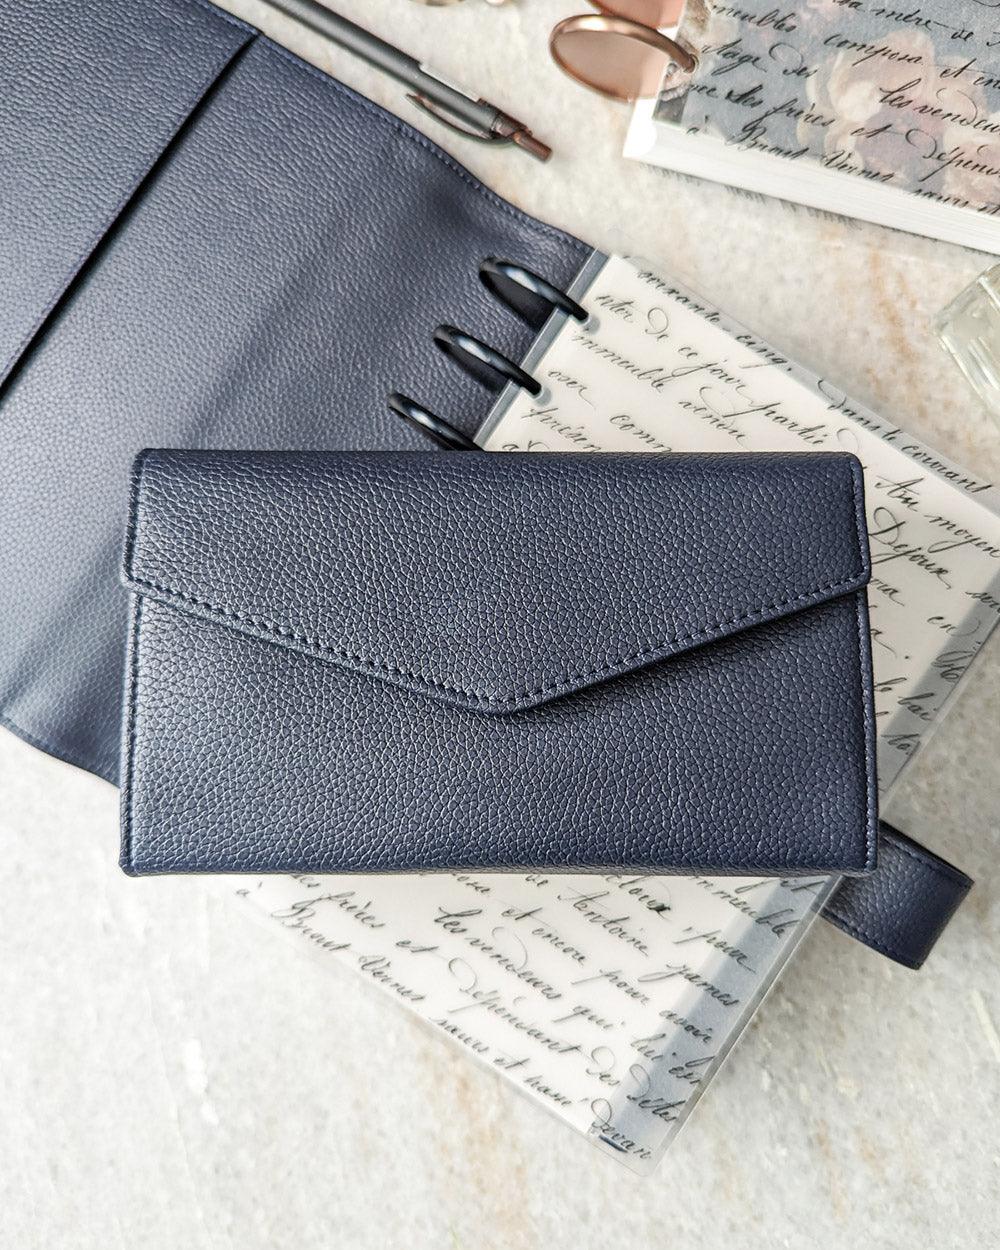 Sunglass case and wallet clutch in midnight blue vegn leather, with a pebble grain finish by Jane's Agenda.